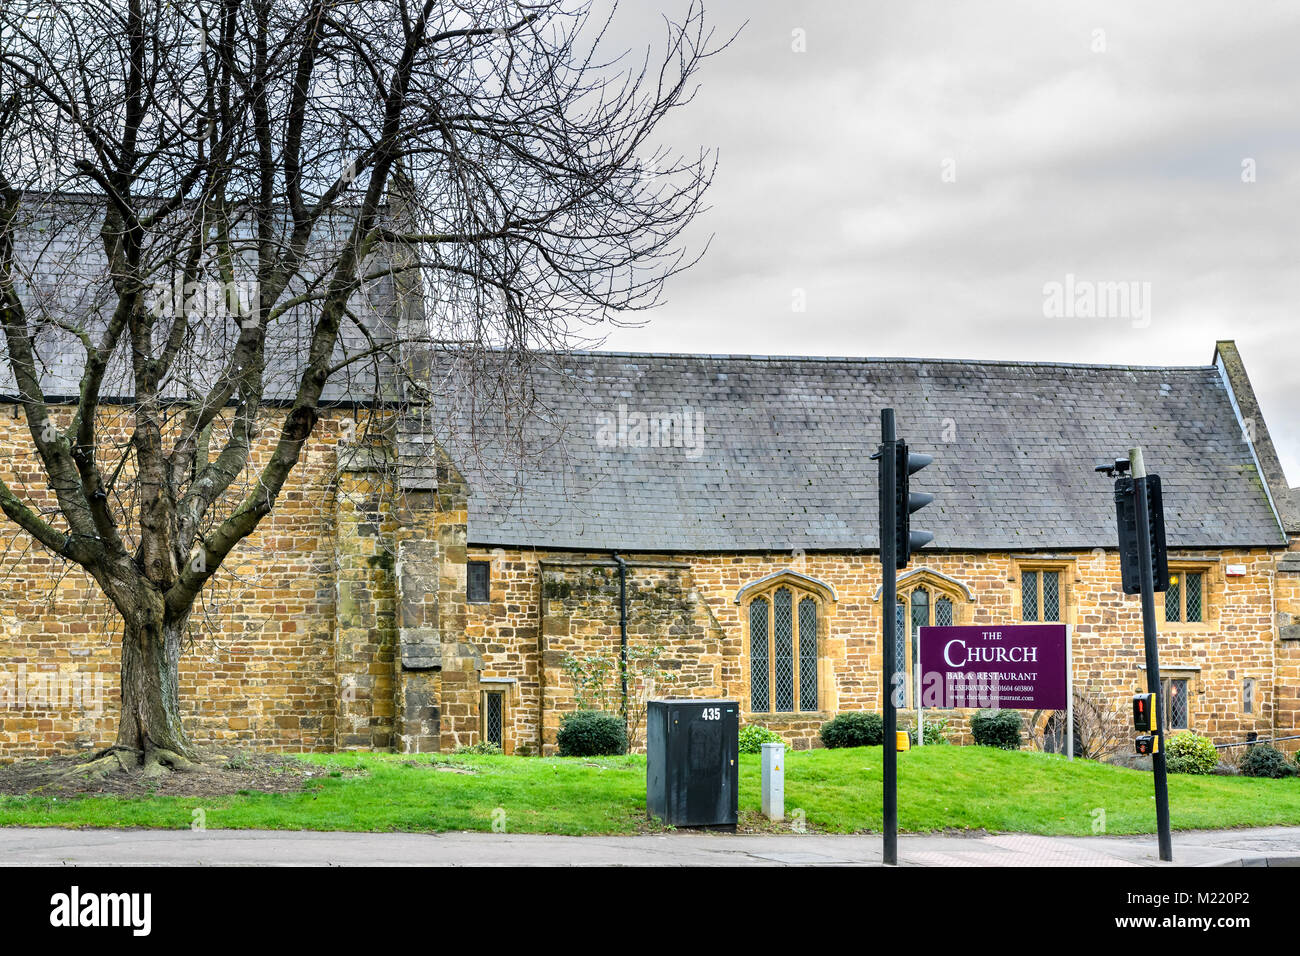 A medieval church converted in to a bar and restaurant at the town of Northampton, northamptonshire, England. Stock Photo